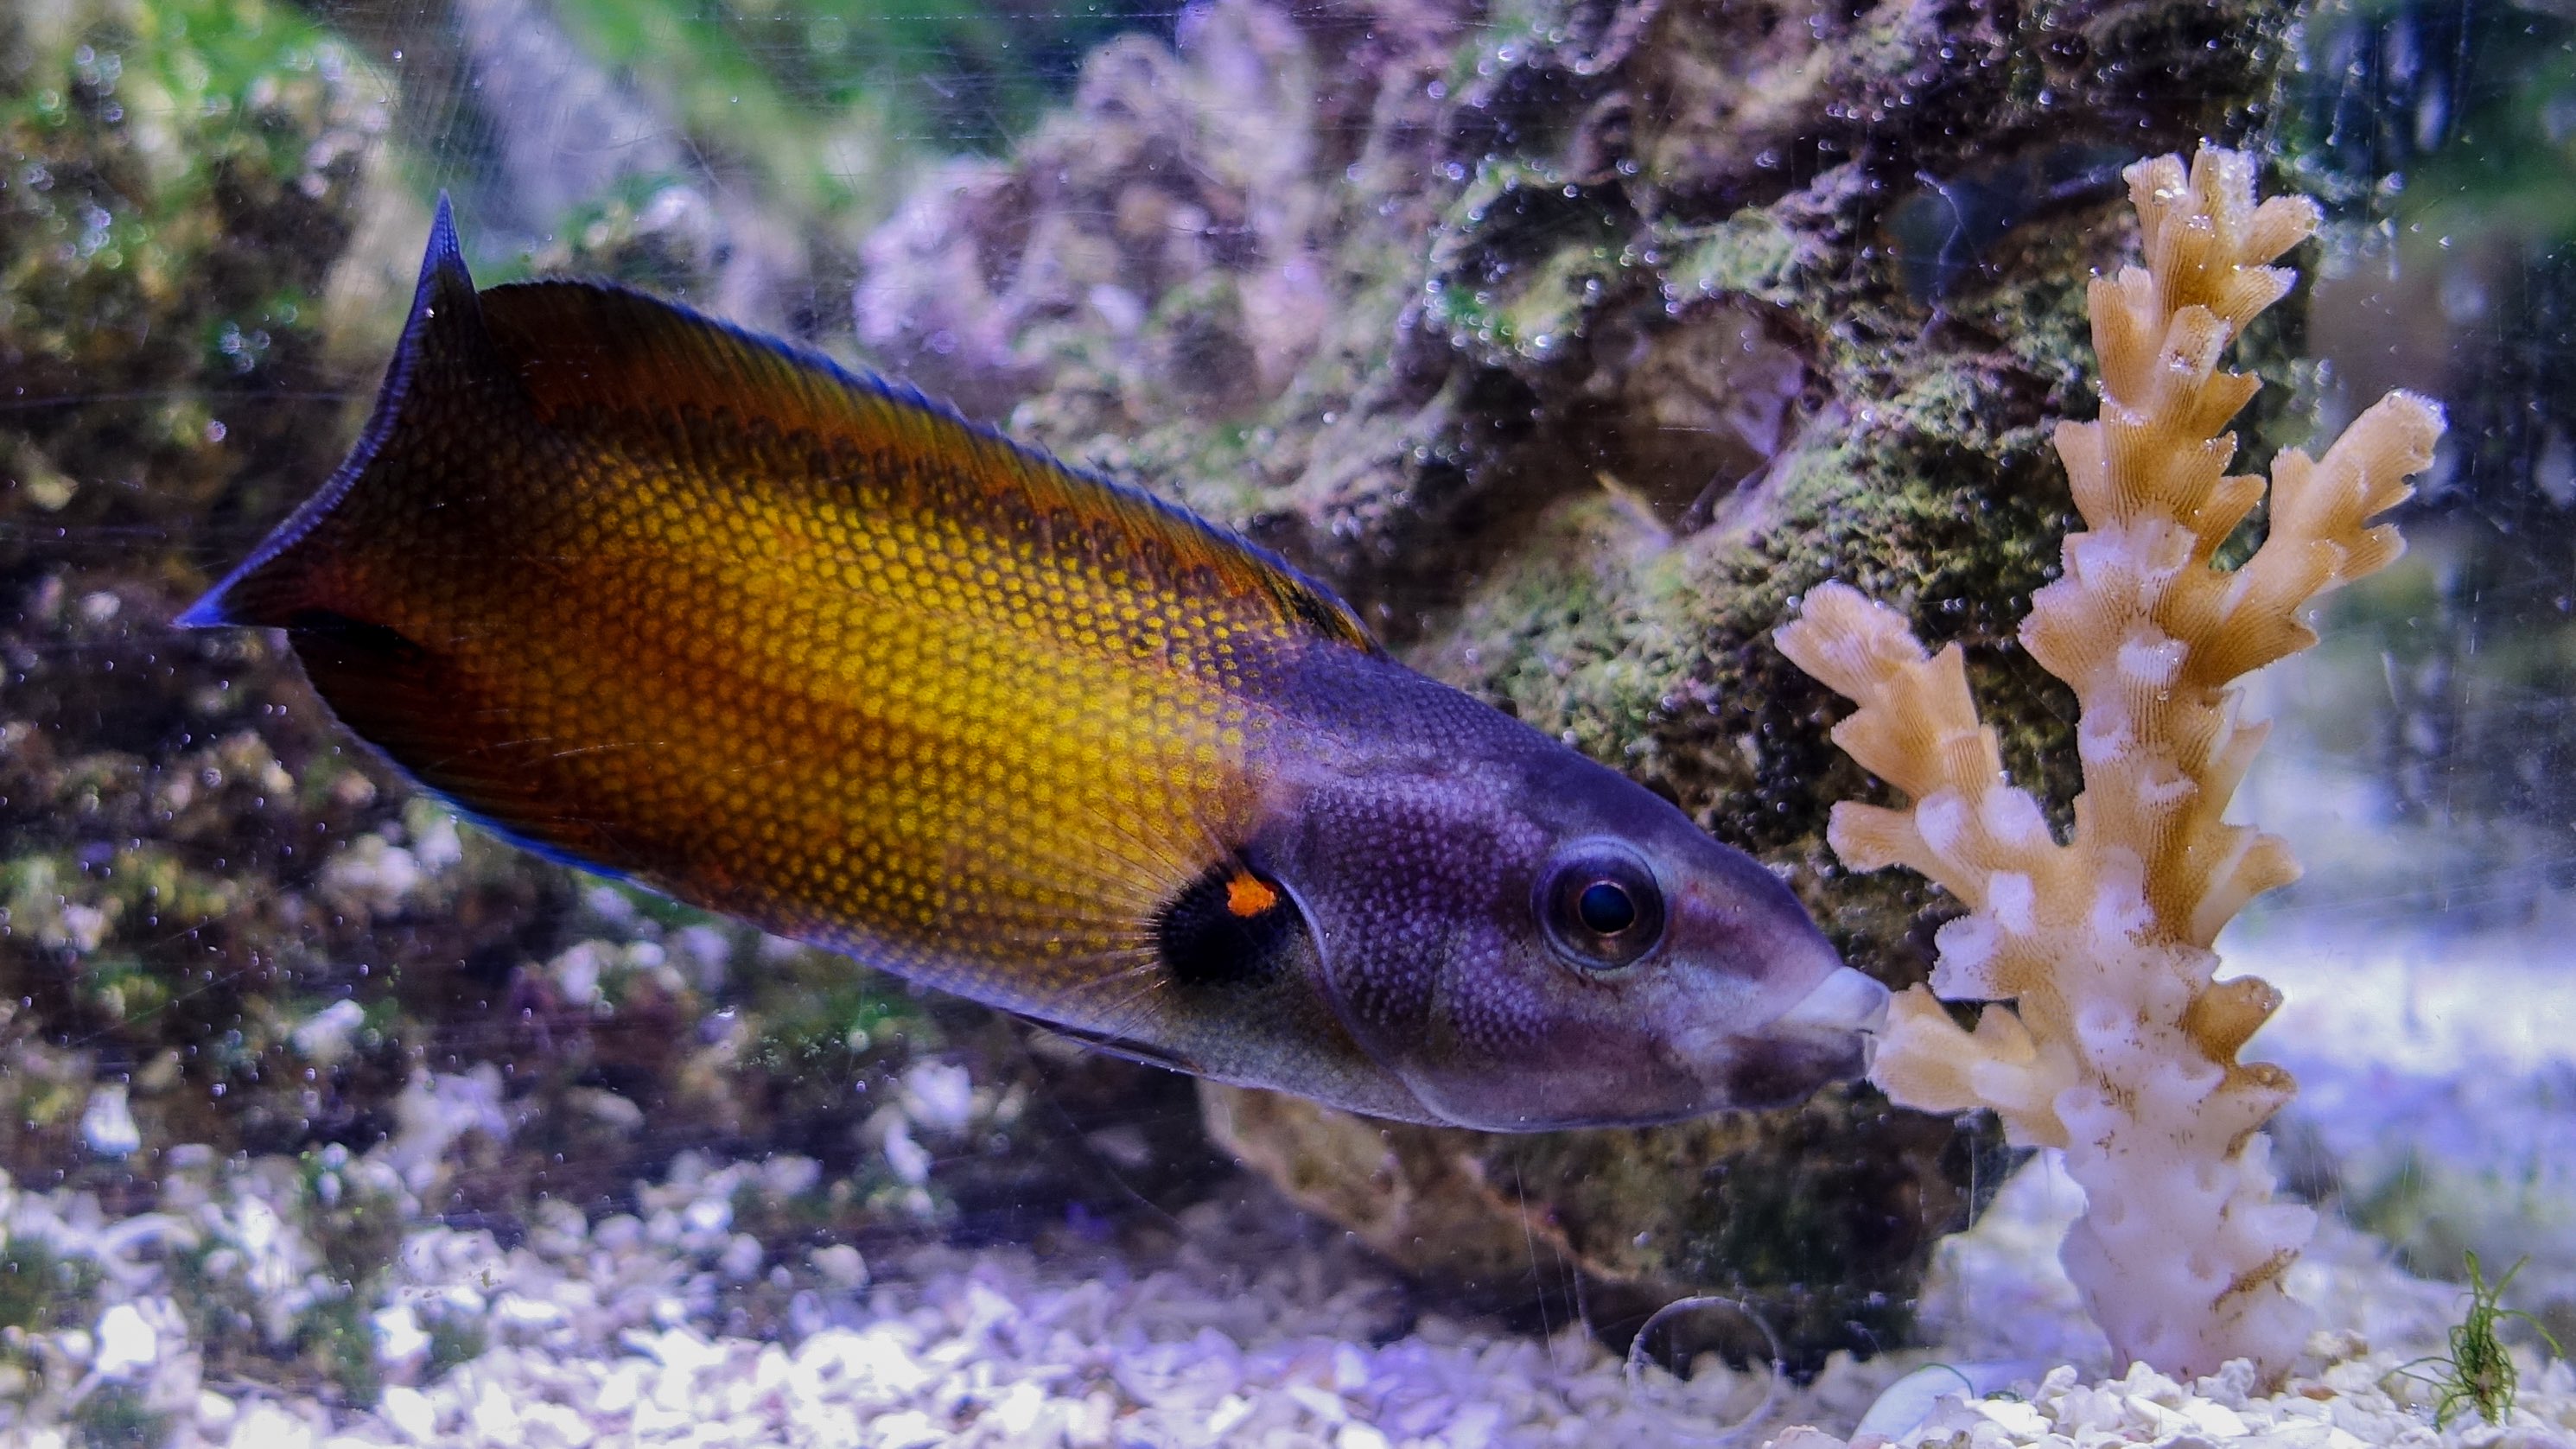 A tubelip wrasse feeding on coral. Credit: Victor Huertas and David Bellwood